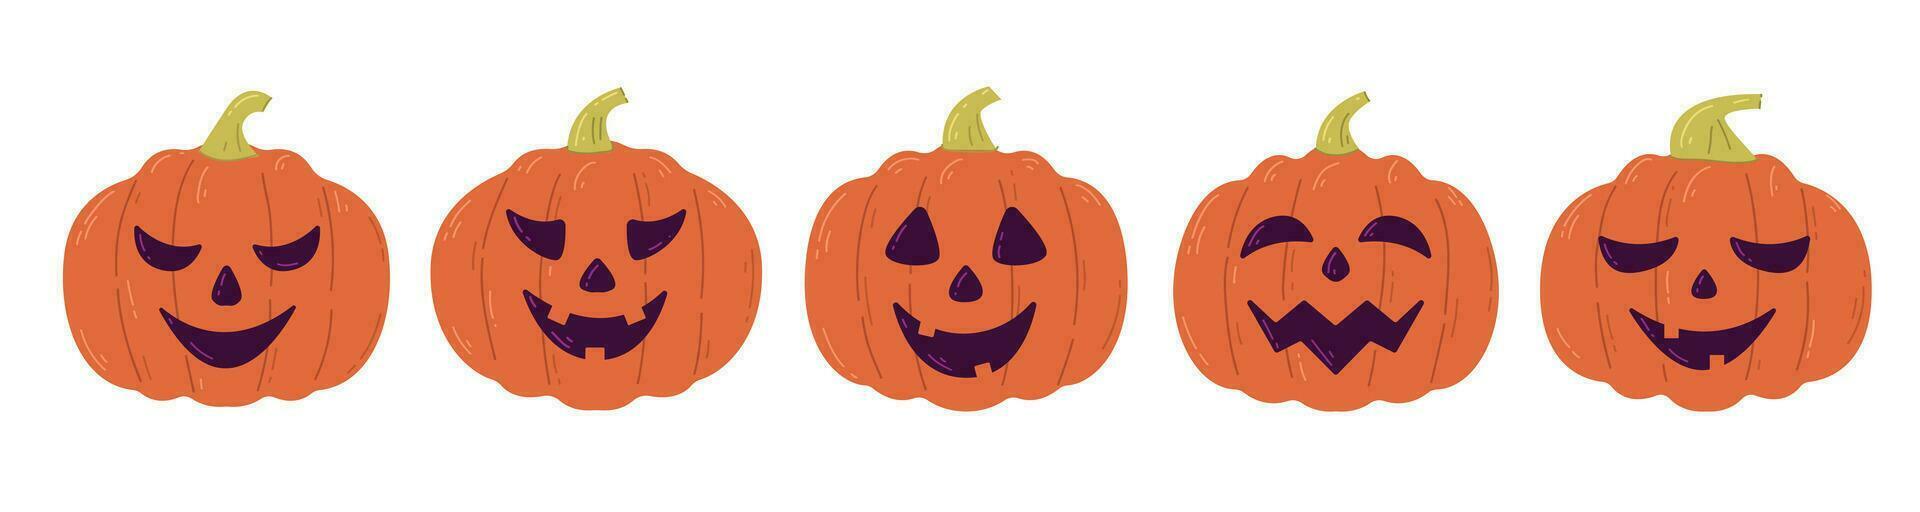 Set pumpkins with different smiles, symbol of Halloween holiday. Vector hand drawn illustration